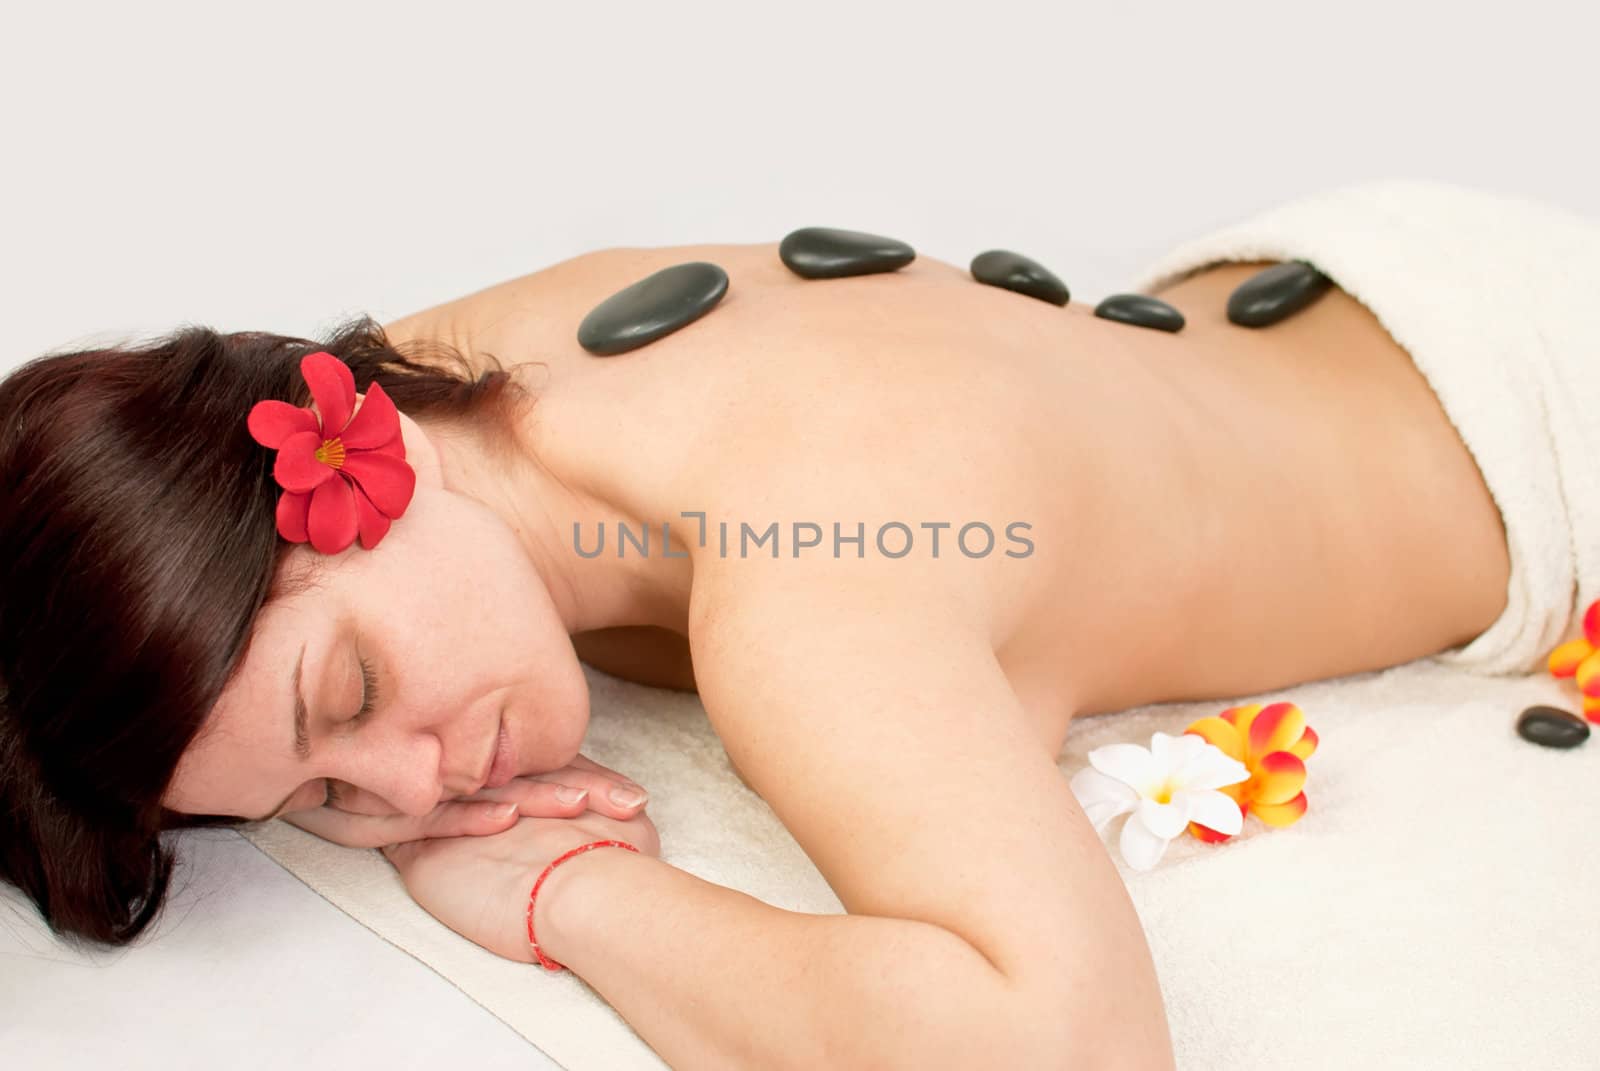 pretty female at spa center, stones relaxing therapy